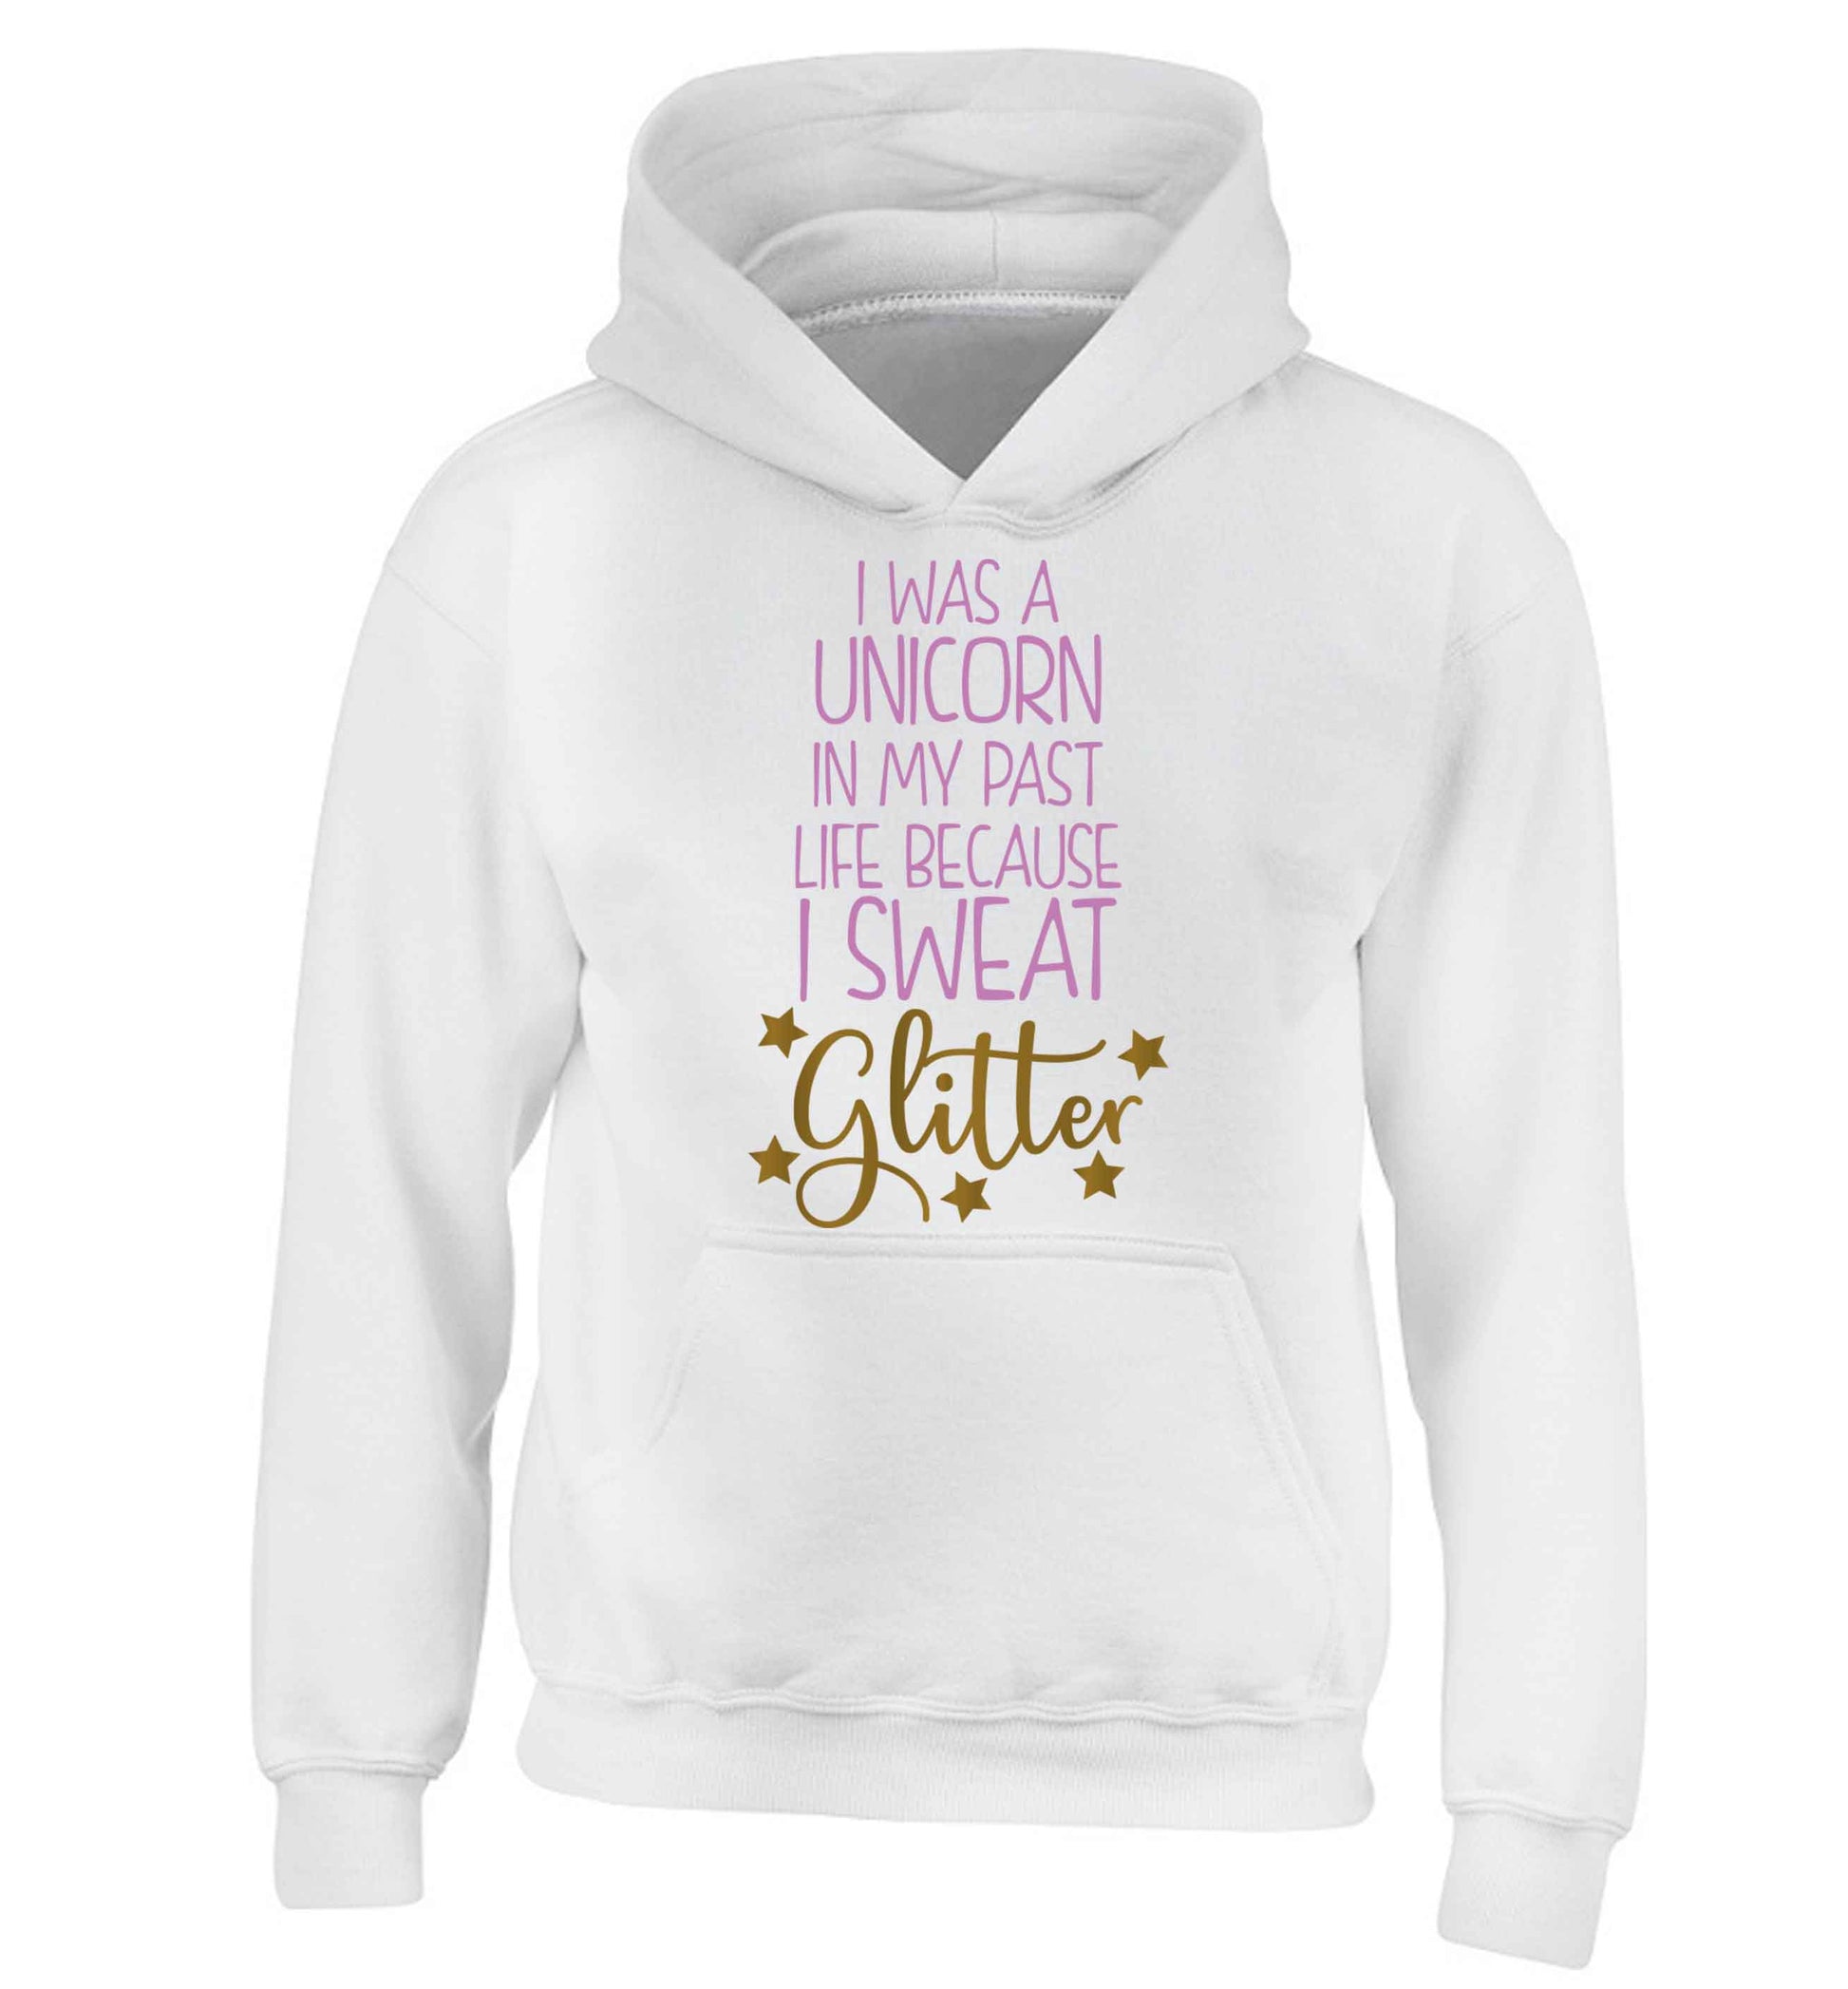 I was a unicorn in my past life because I sweat glitter children's white hoodie 12-13 Years